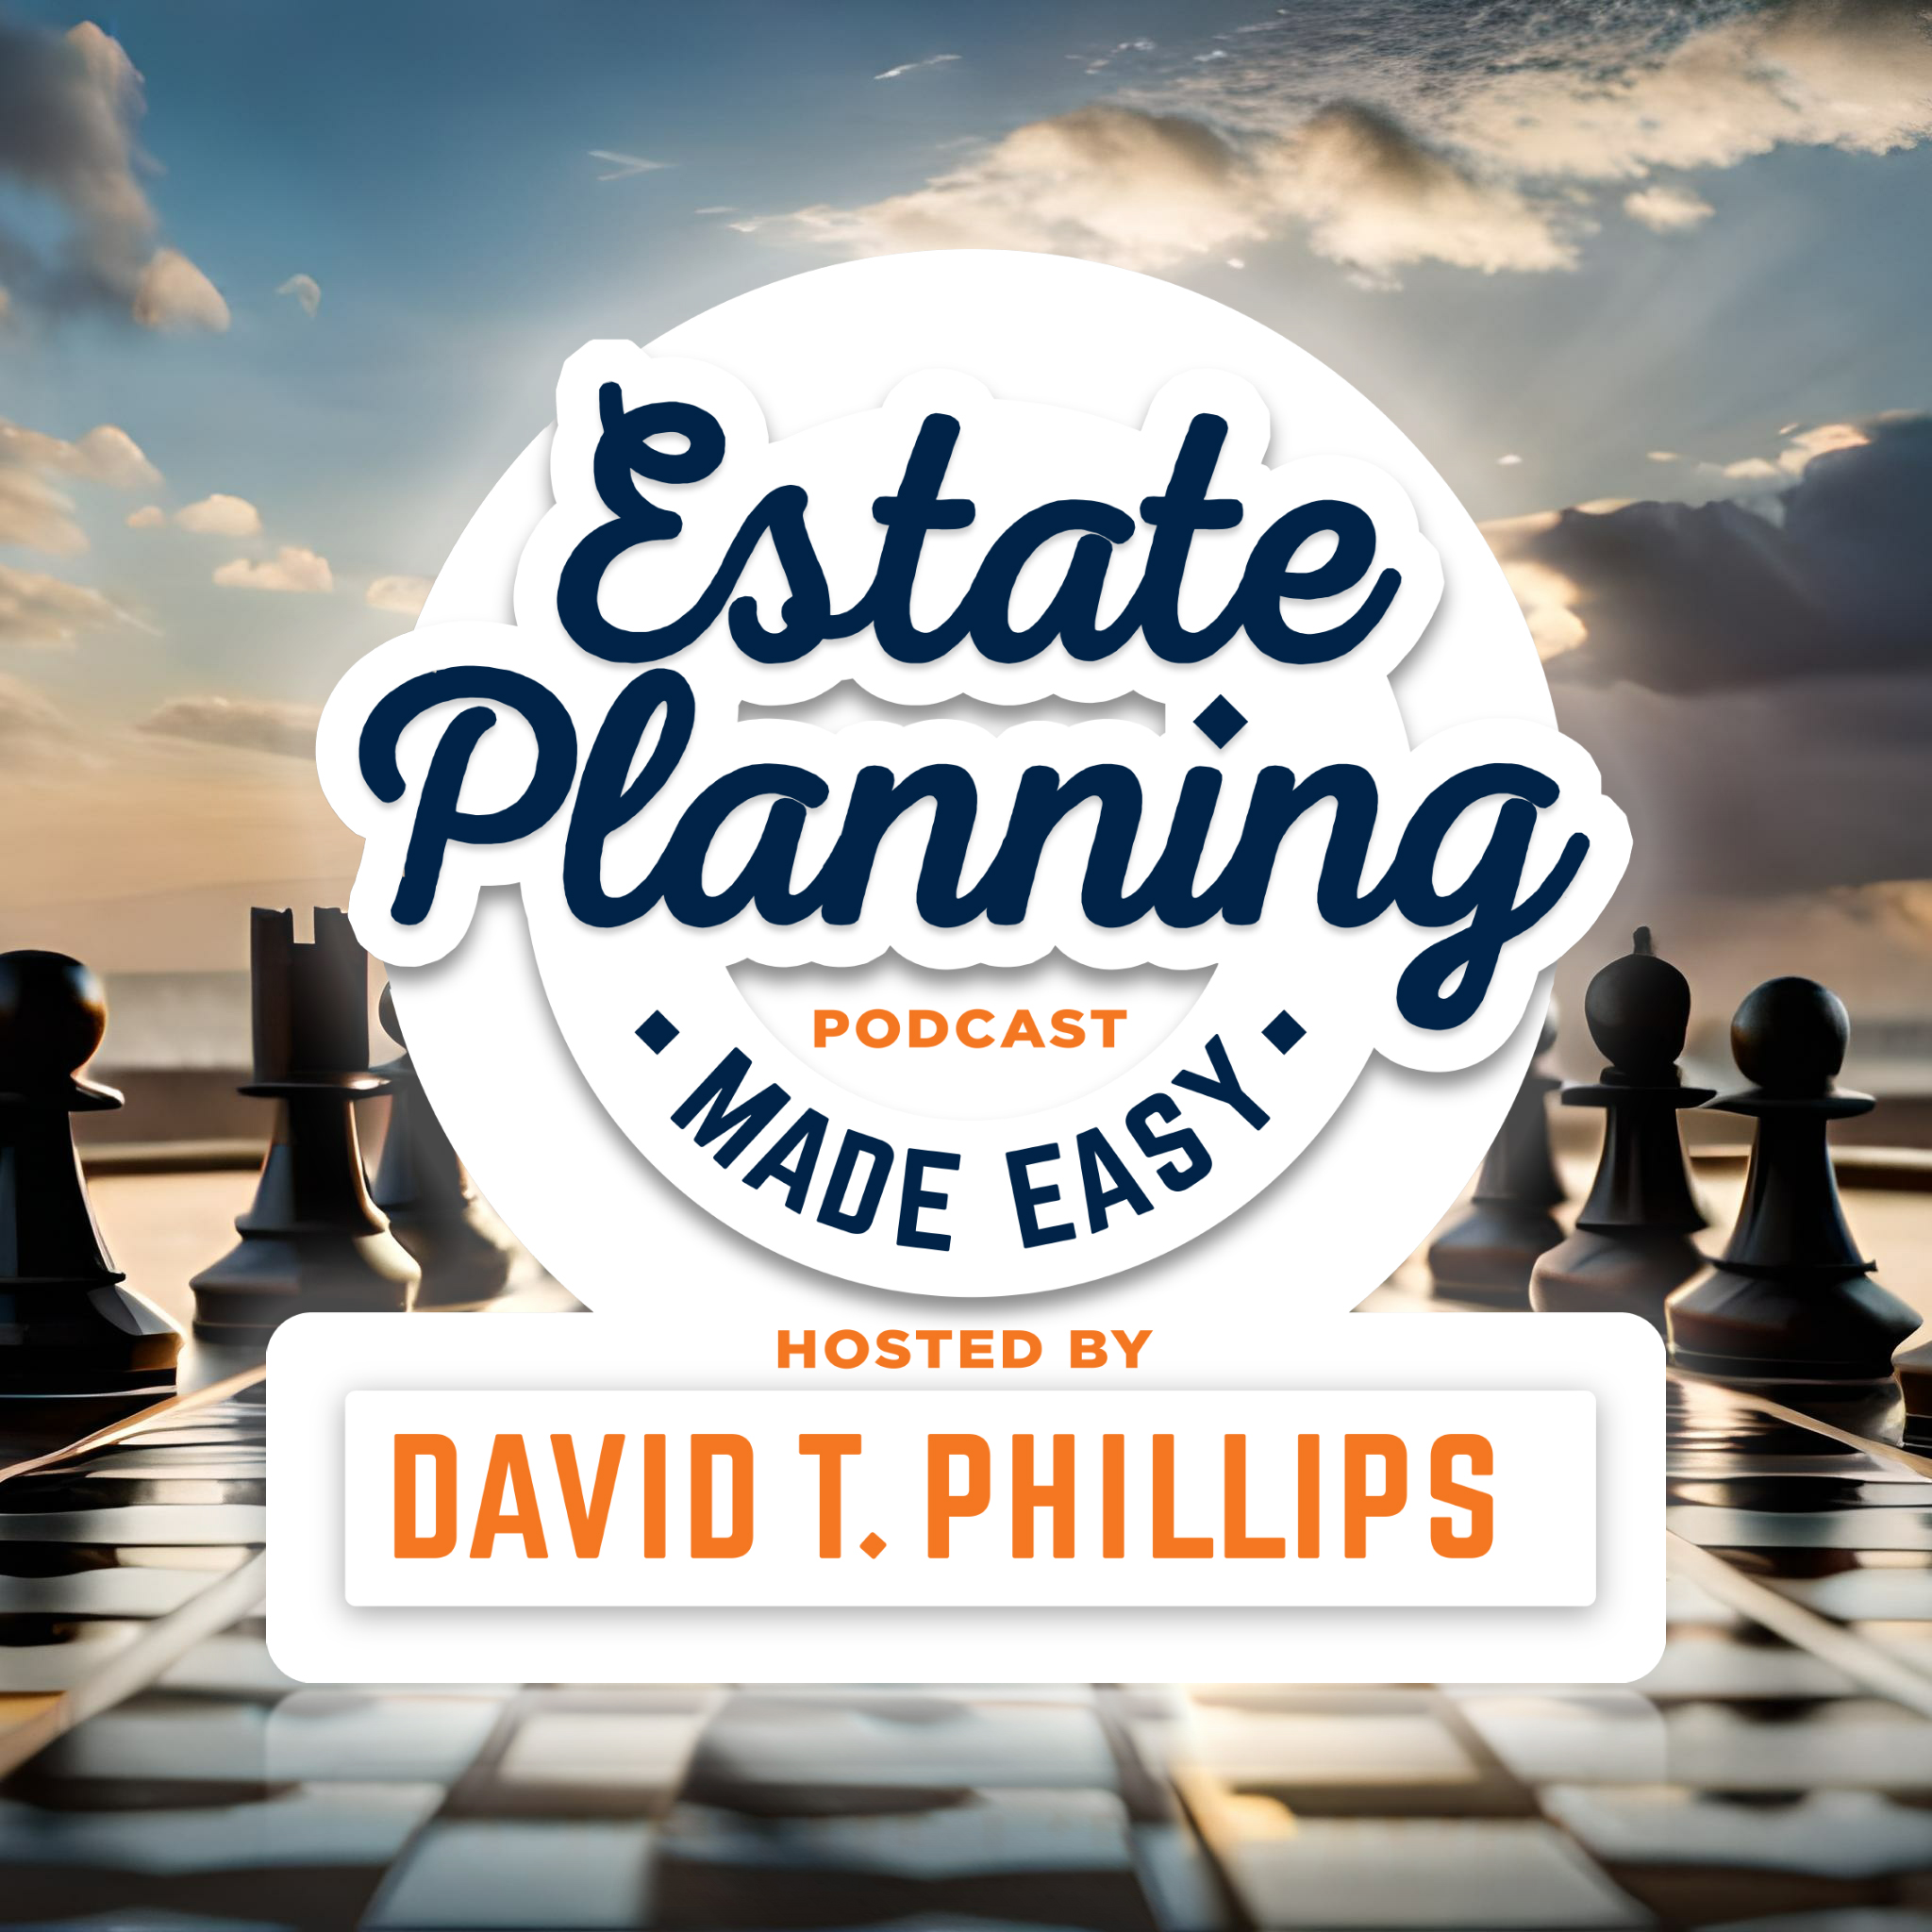 What is the number one most common estate planning mistake and how to avoid it?